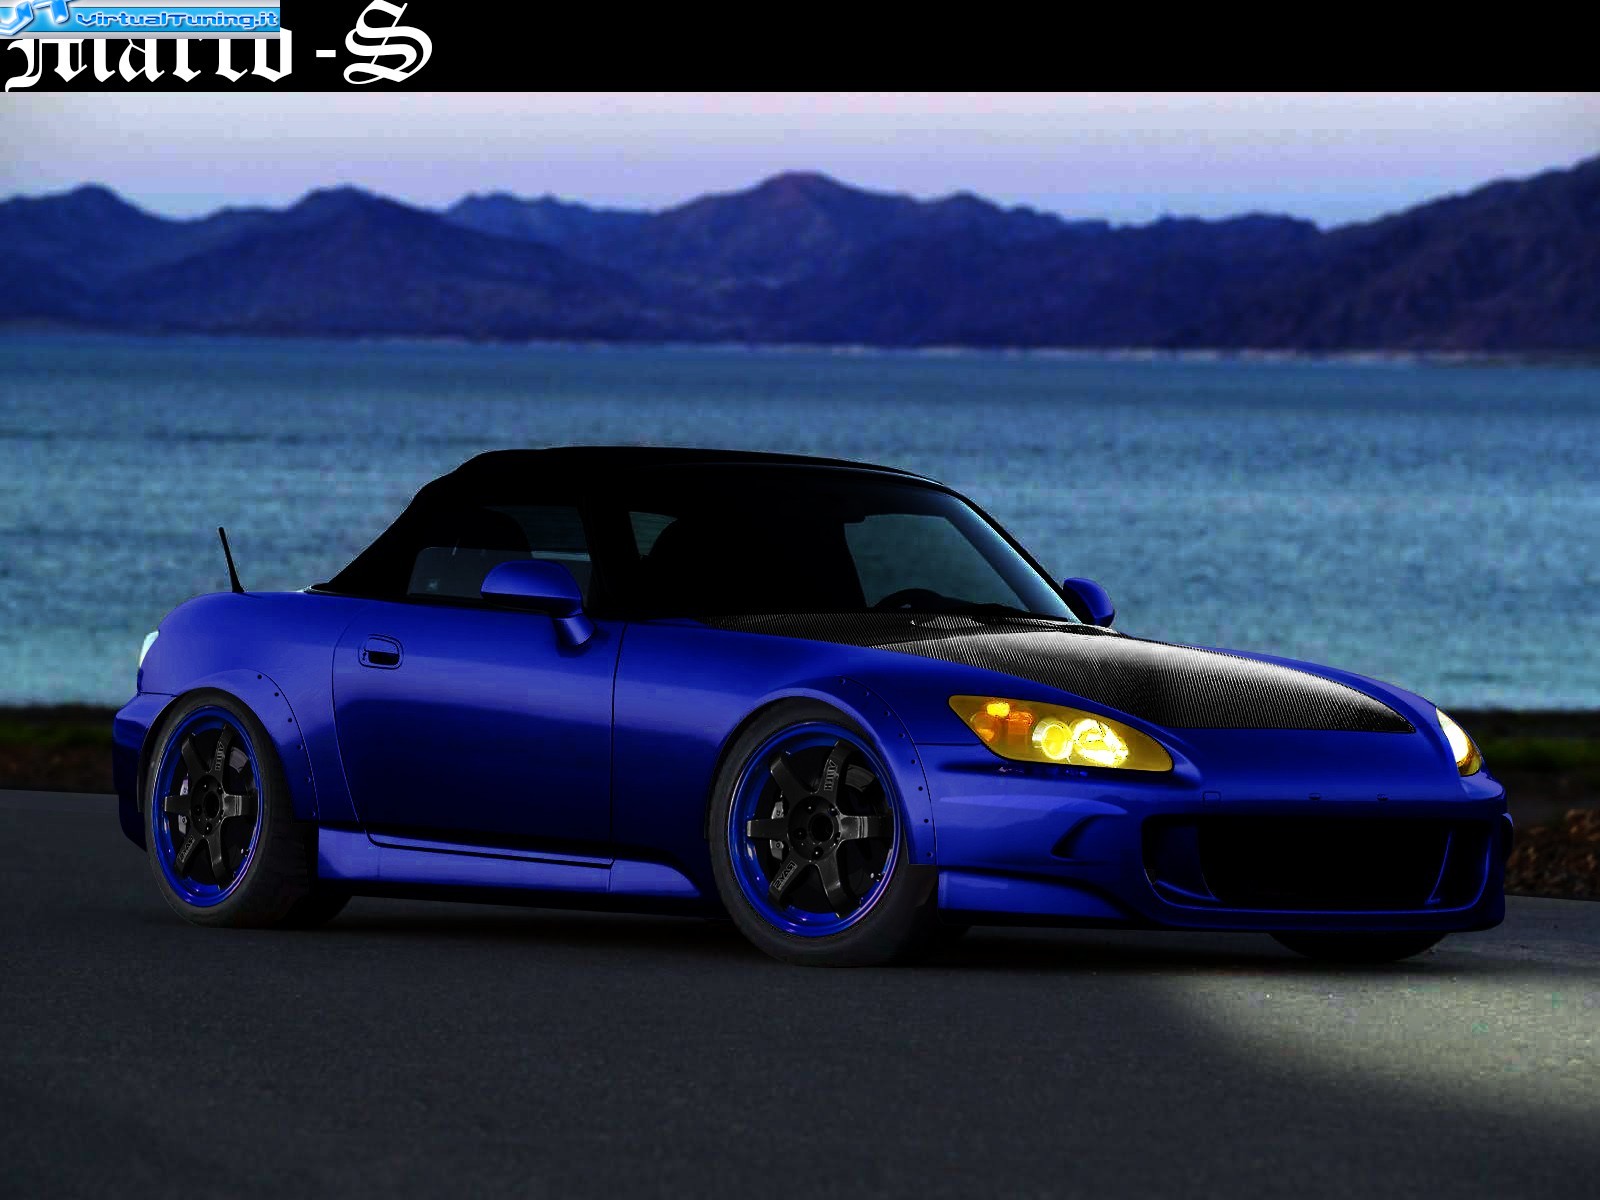 VirtualTuning HONDA S2000 by Marco-S